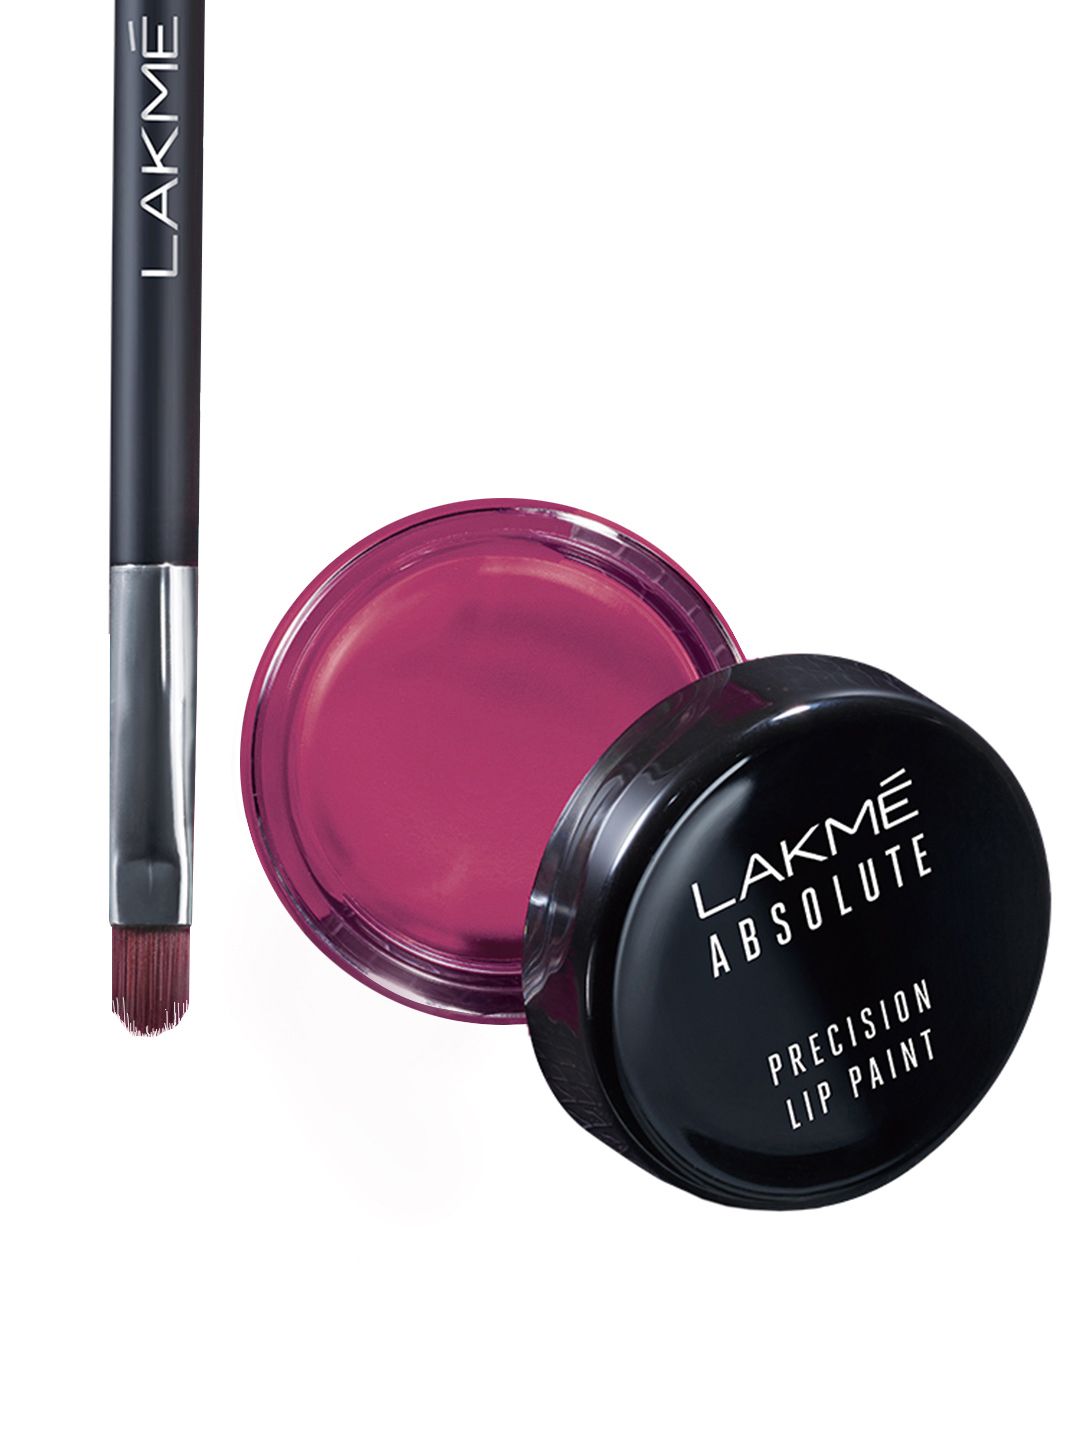 Lakme Absolute Precision Lip Paint - Victorian Magenta 501 Price in India